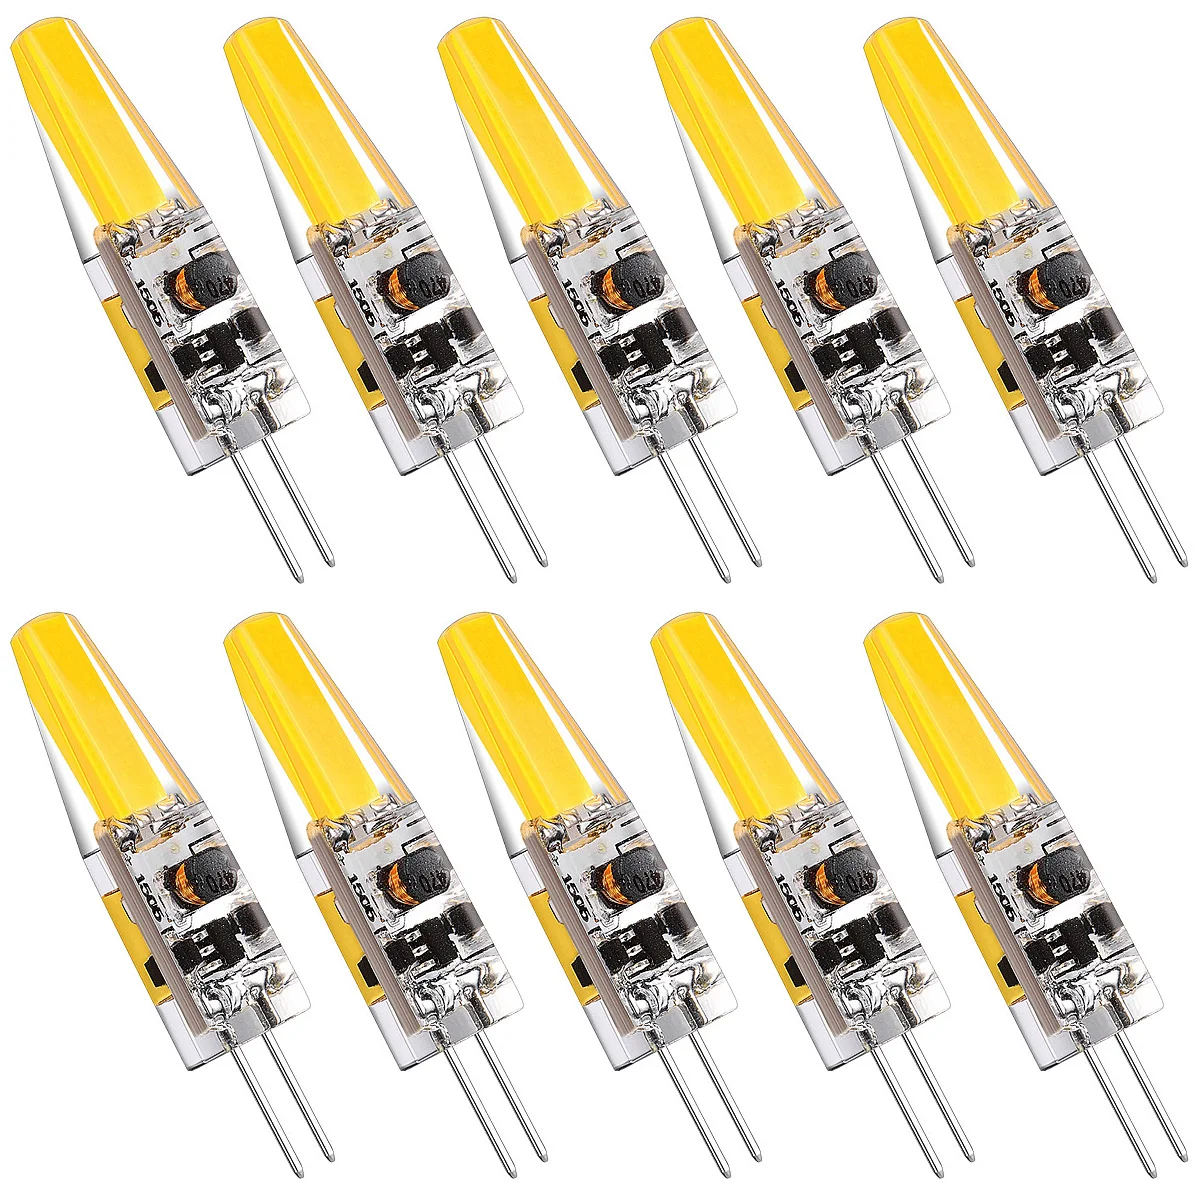 10 PCS Dimmable Mini G4 LED COB Lamp 6W Bulb AC DC 12V 220V Candle Lights Replace 30W 40W Halogen for Chandelier Spotlight